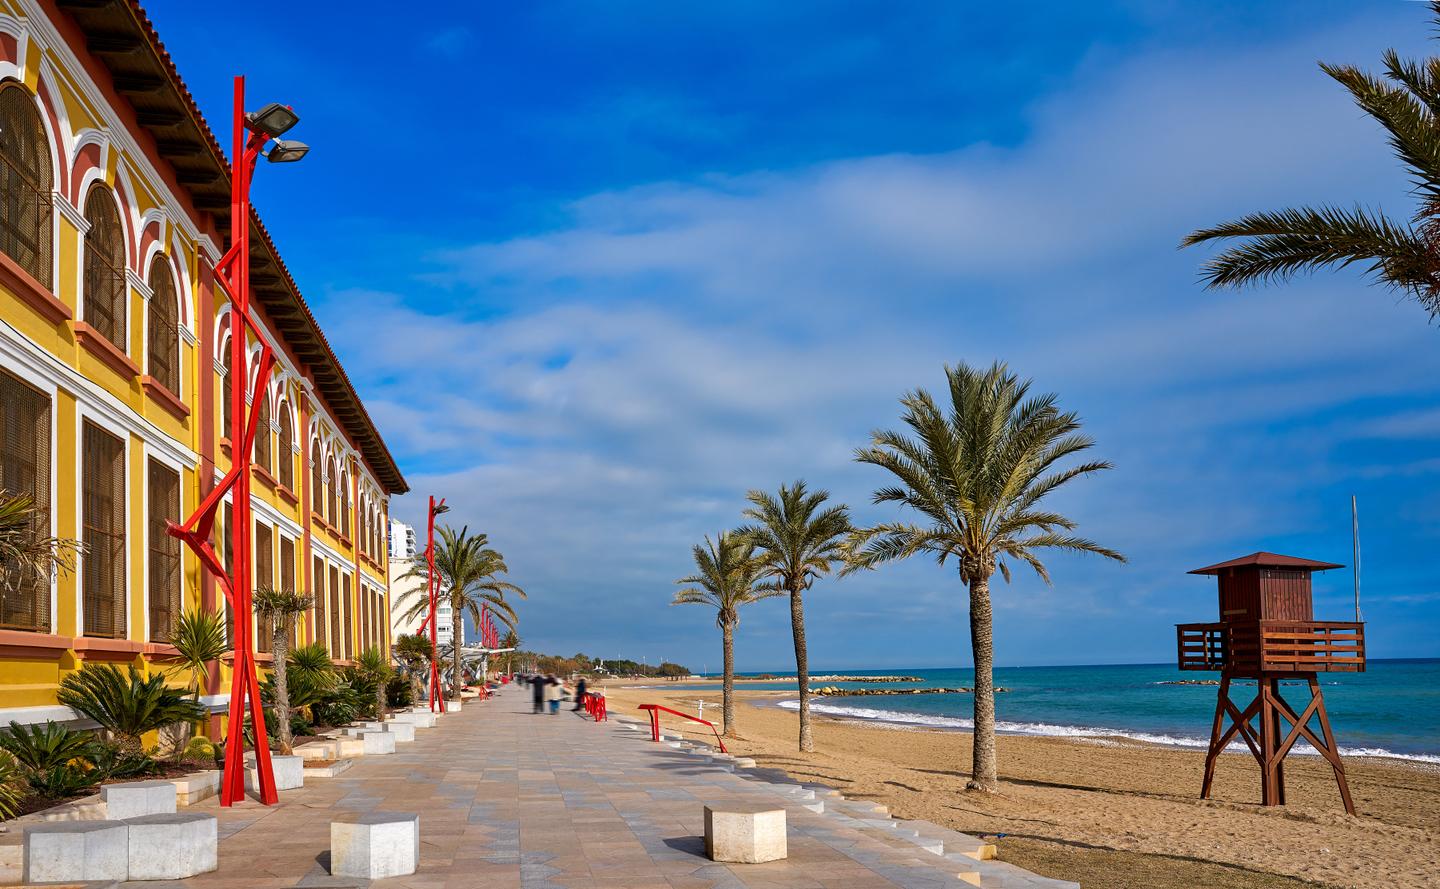 A vibrant seaside promenade in Castellón, Spain, featuring colorful buildings with arched windows, red lamp posts, and palm trees lining the walkway. The sandy beach and calm sea are visible, creating a picturesque coastal scene.